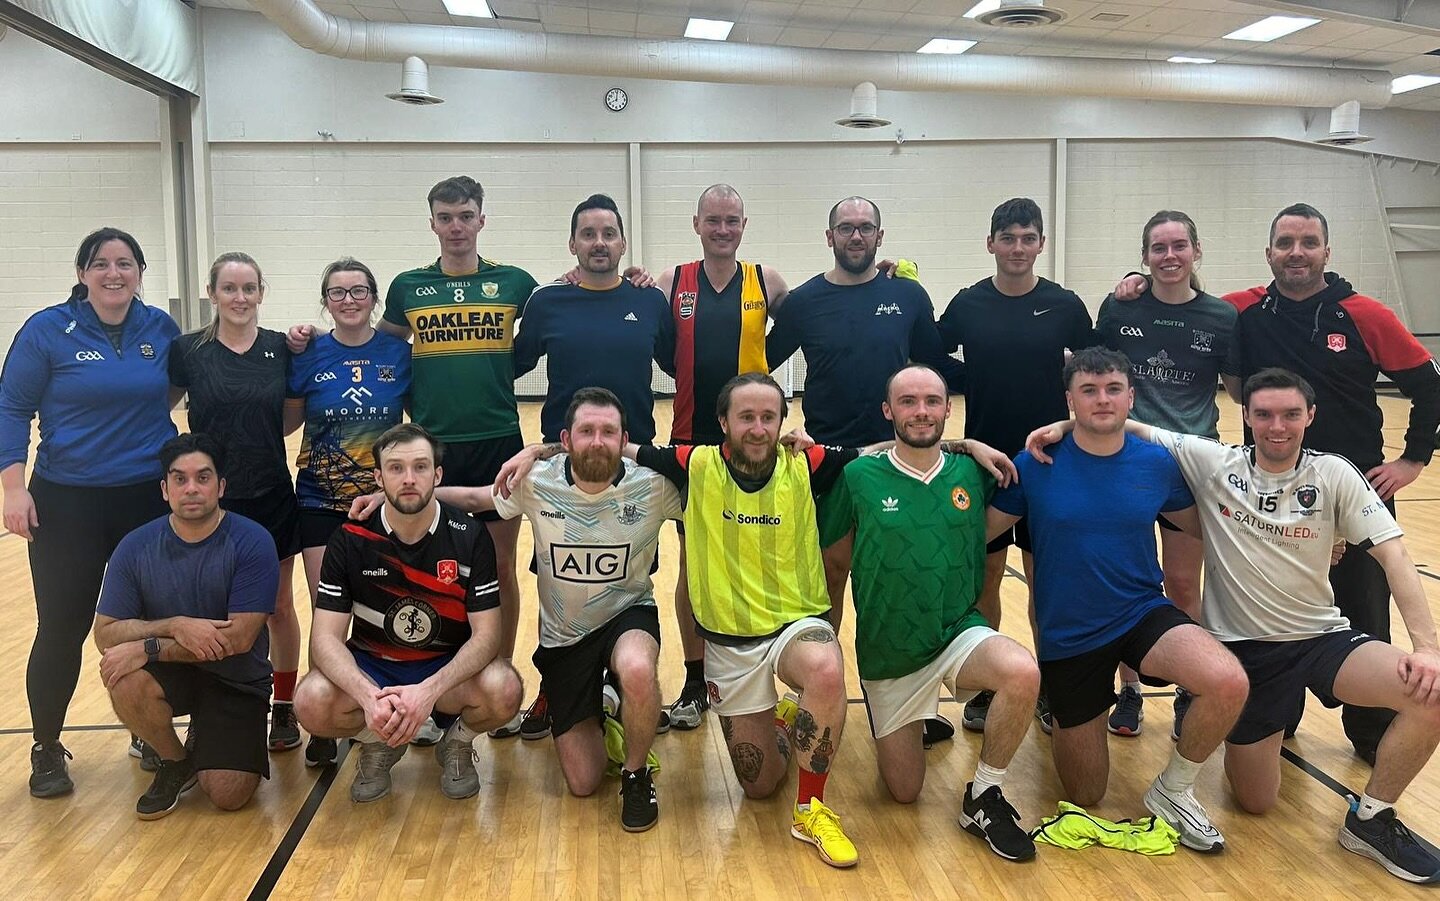 Our indoor training is looking good! Always great to be joined by some of the @calgarykangaroos!

Only a few weeks left before we head back outdoors, let&rsquo;s make the most of the indoor practices!